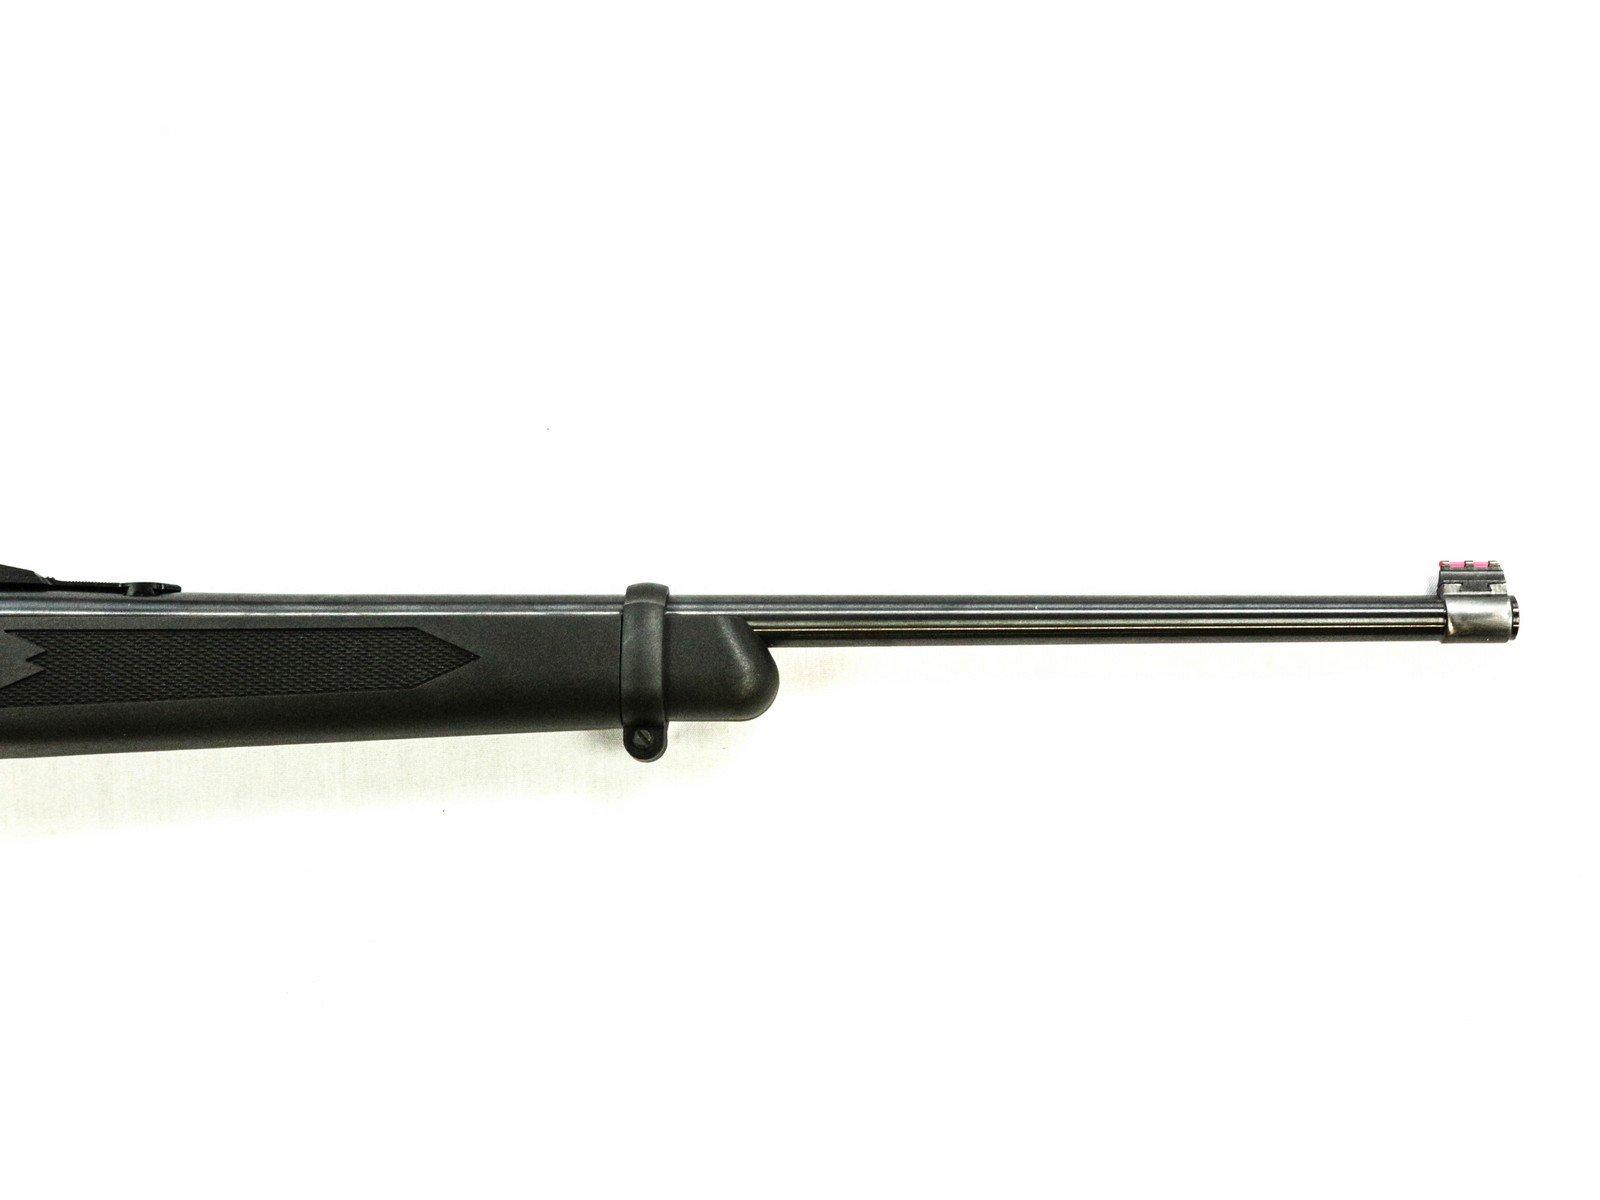 Synthetic Stock Ruger 10/22 22LR